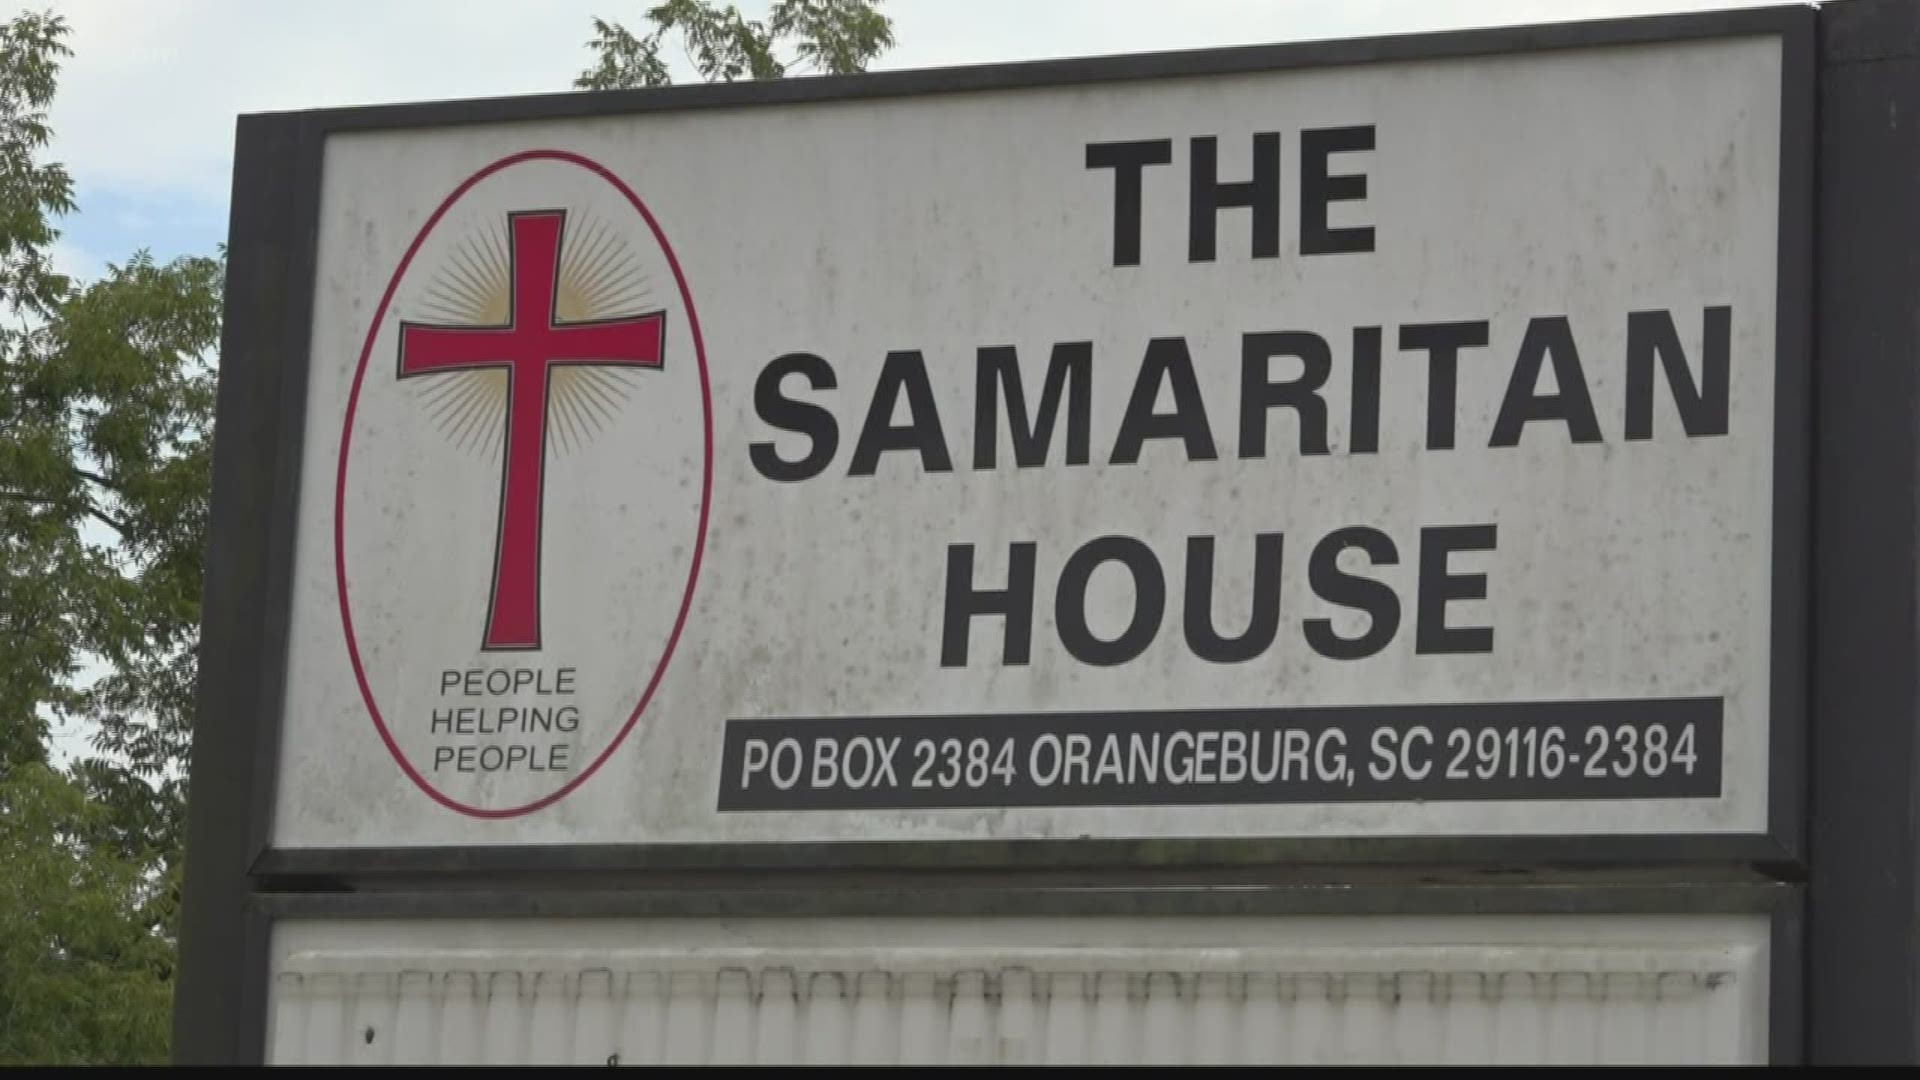 The shelter for the homeless in Orangeburg was closed due to a lack of federal funding.